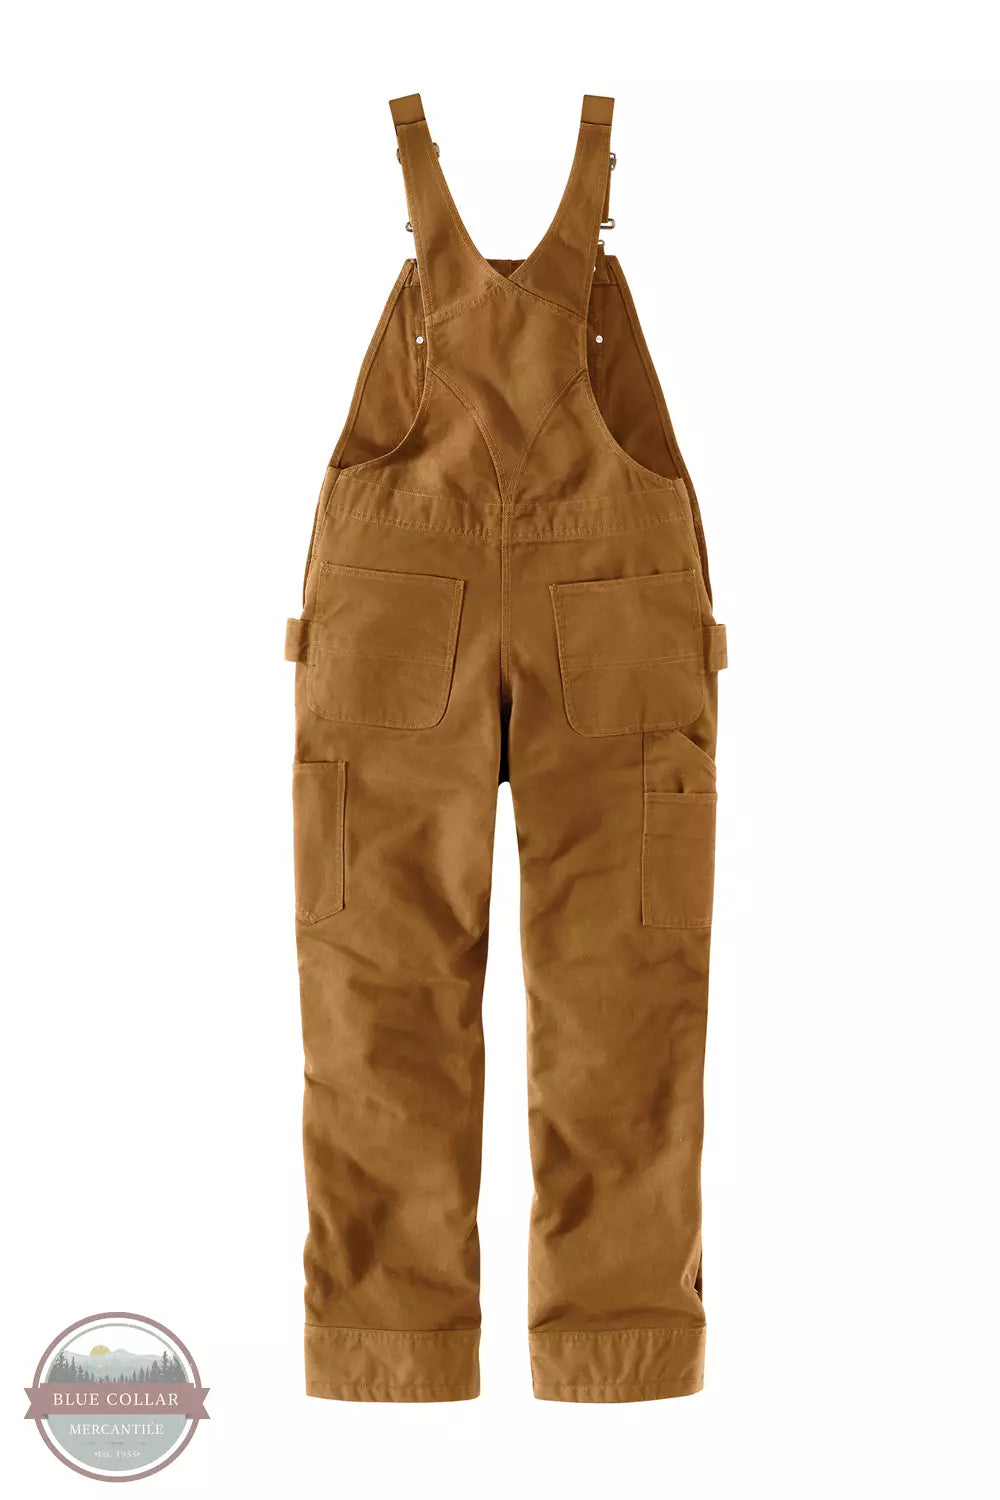 Carhartt 104049-BRN Relaxed Fit Washed Duck Insulated Bib Overalls in Carhartt Brown Back View